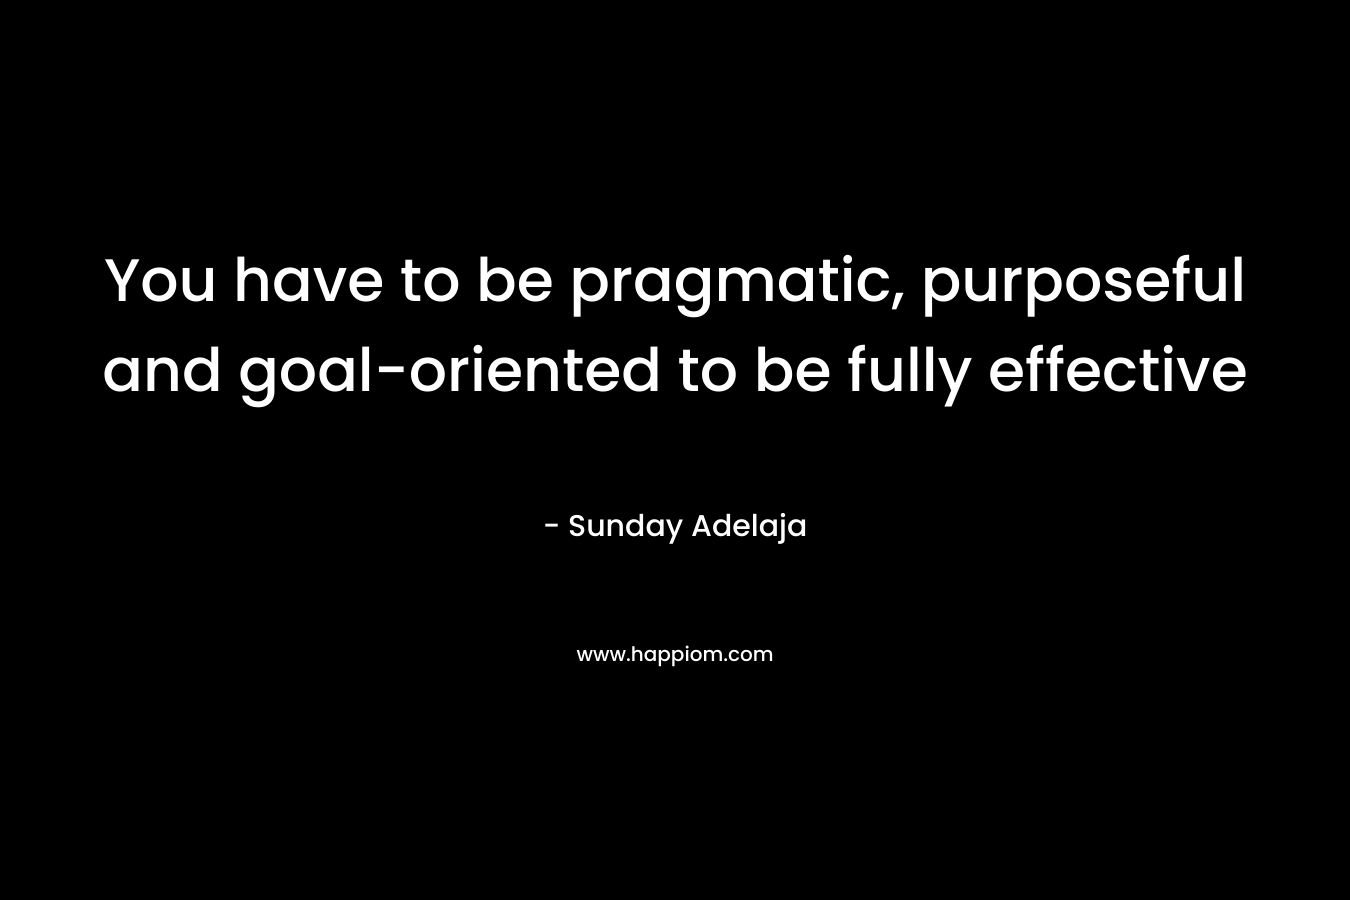 You have to be pragmatic, purposeful and goal-oriented to be fully effective